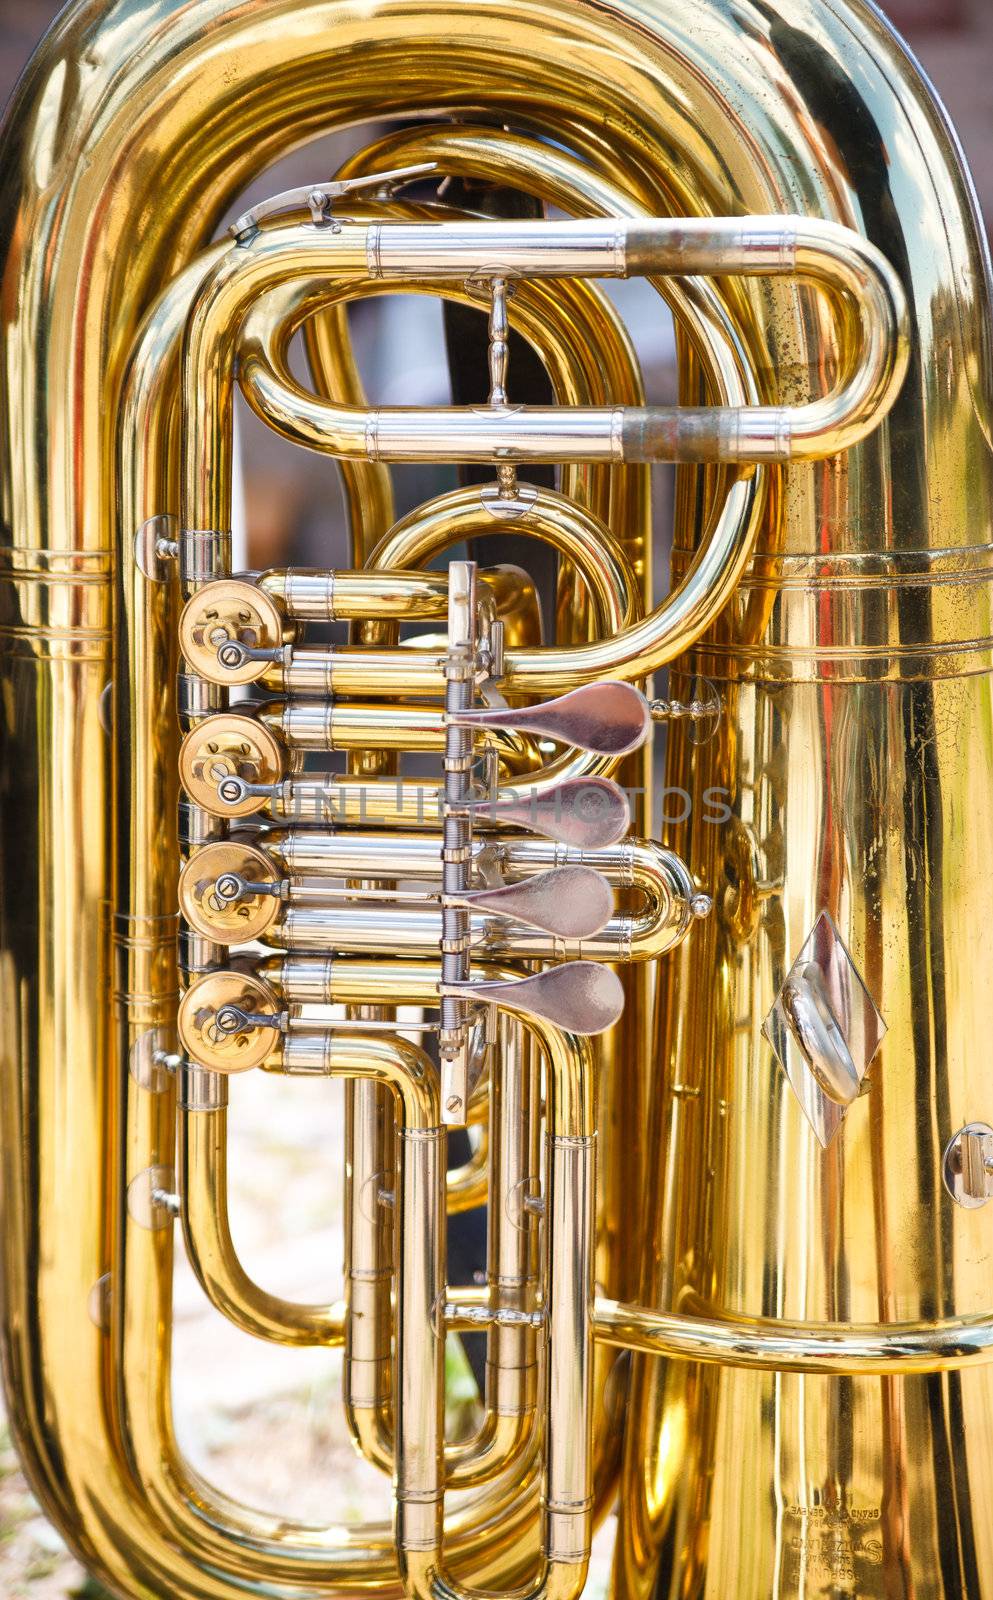 Tuba is a musical instrument made of brass